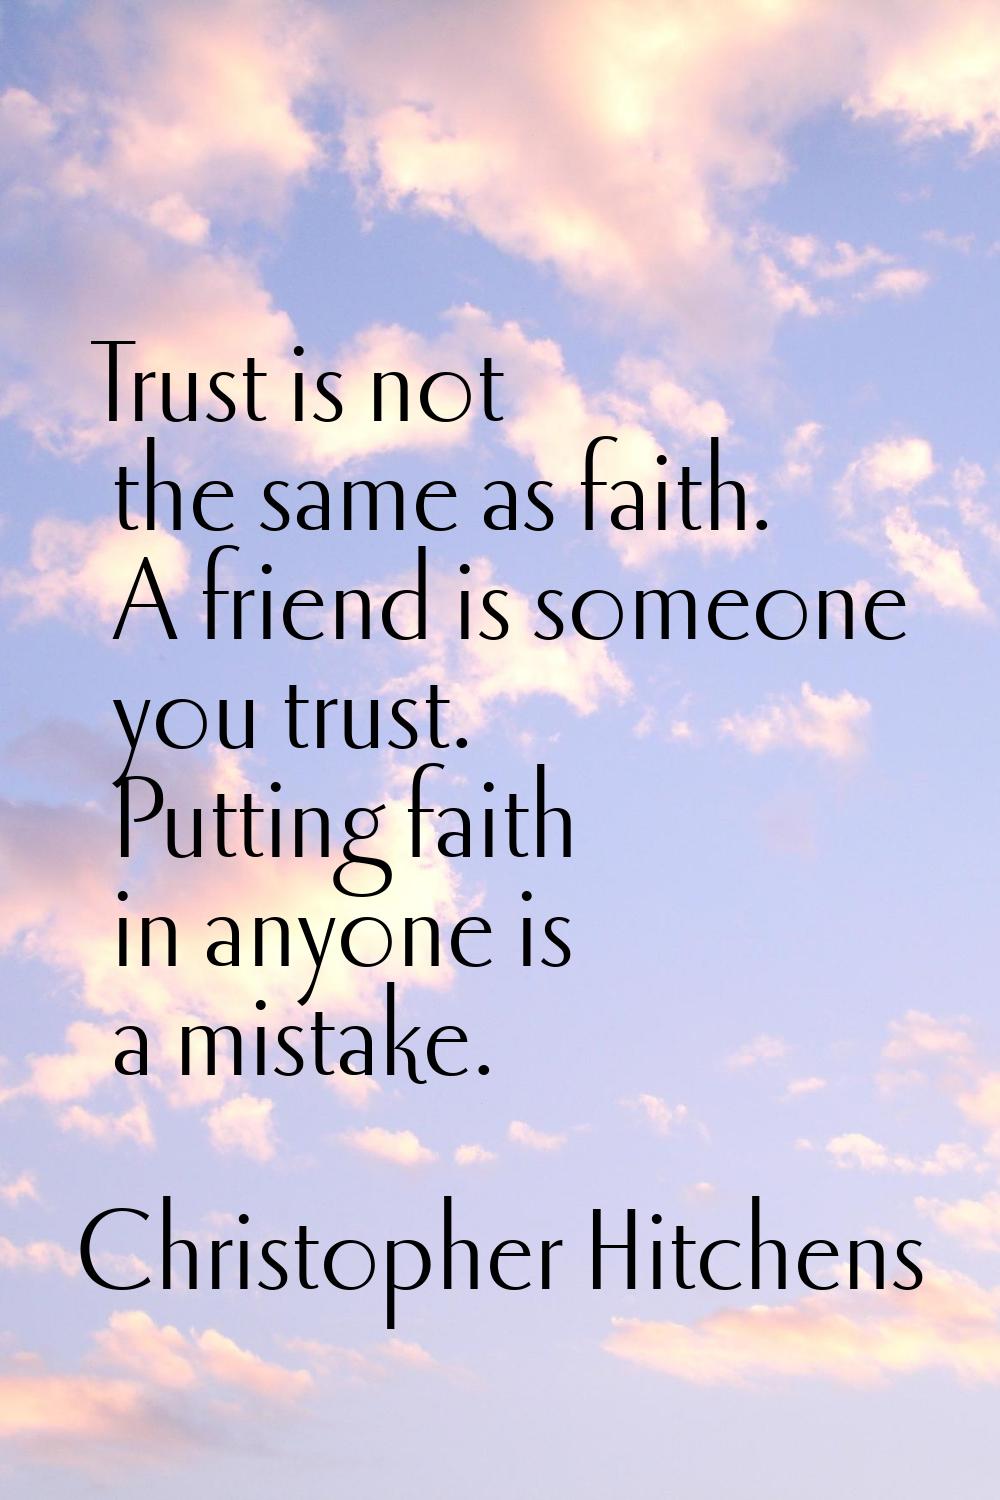 Trust is not the same as faith. A friend is someone you trust. Putting faith in anyone is a mistake